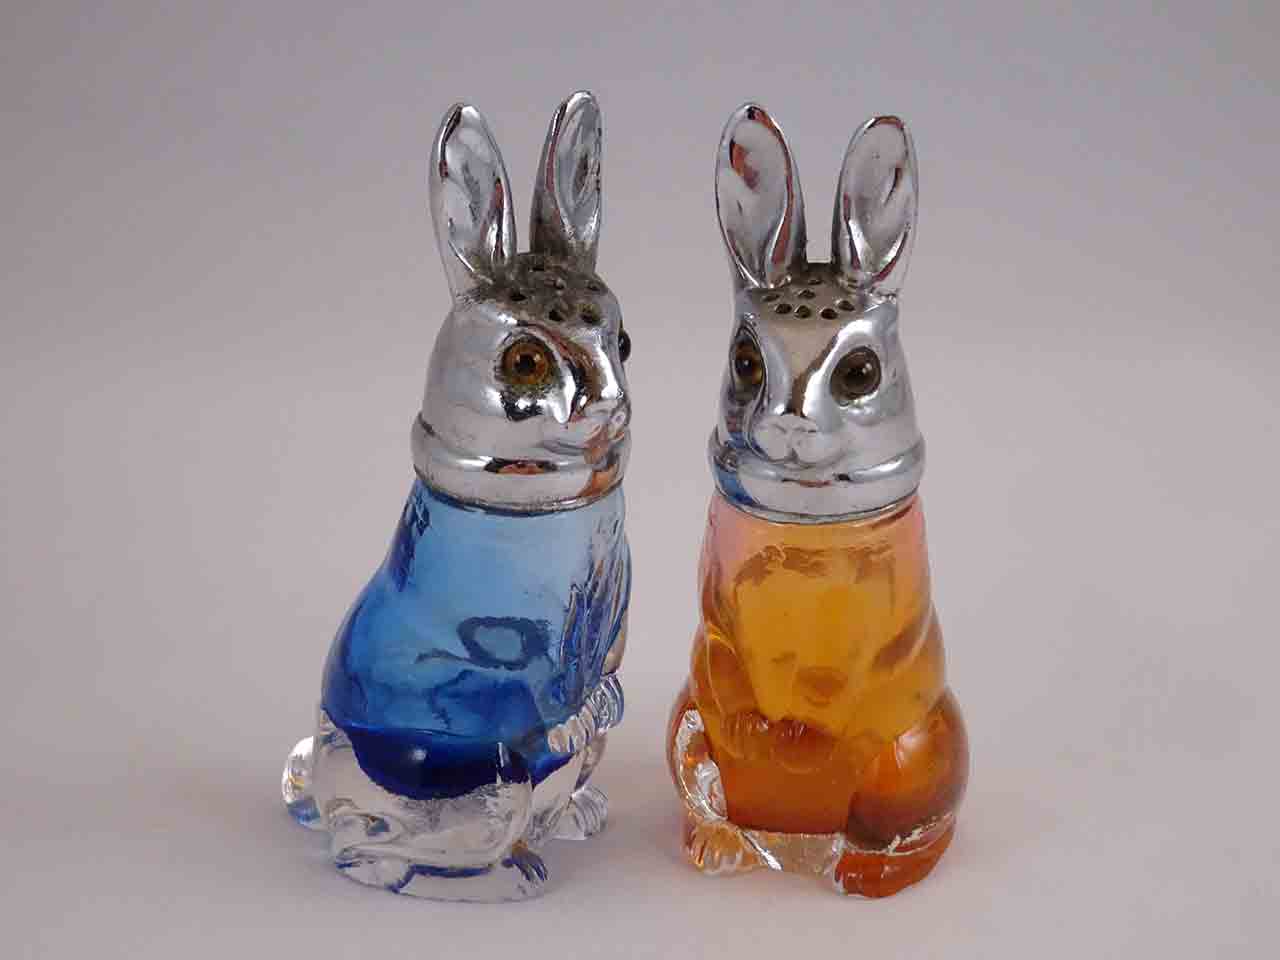 Antique glass rabbit salt and pepper shakers by S.W. Farber and Czechoslovakia